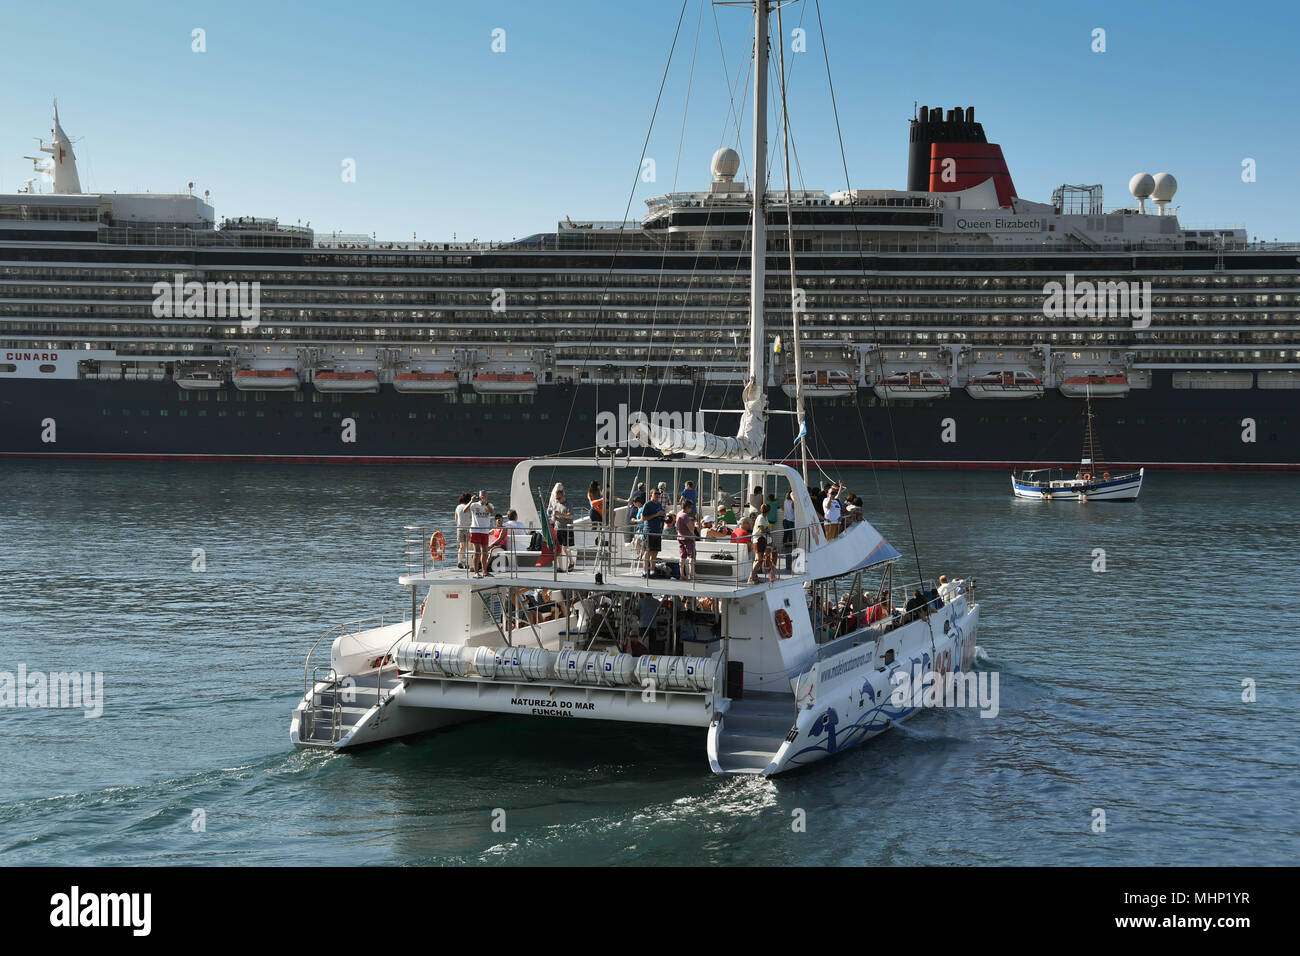 A catamaran leaving the harbour in Funchal, Madeira with tourists on a sightseeing cruise. The cruise liner Queen Elizabeth is in the background Stock Photo